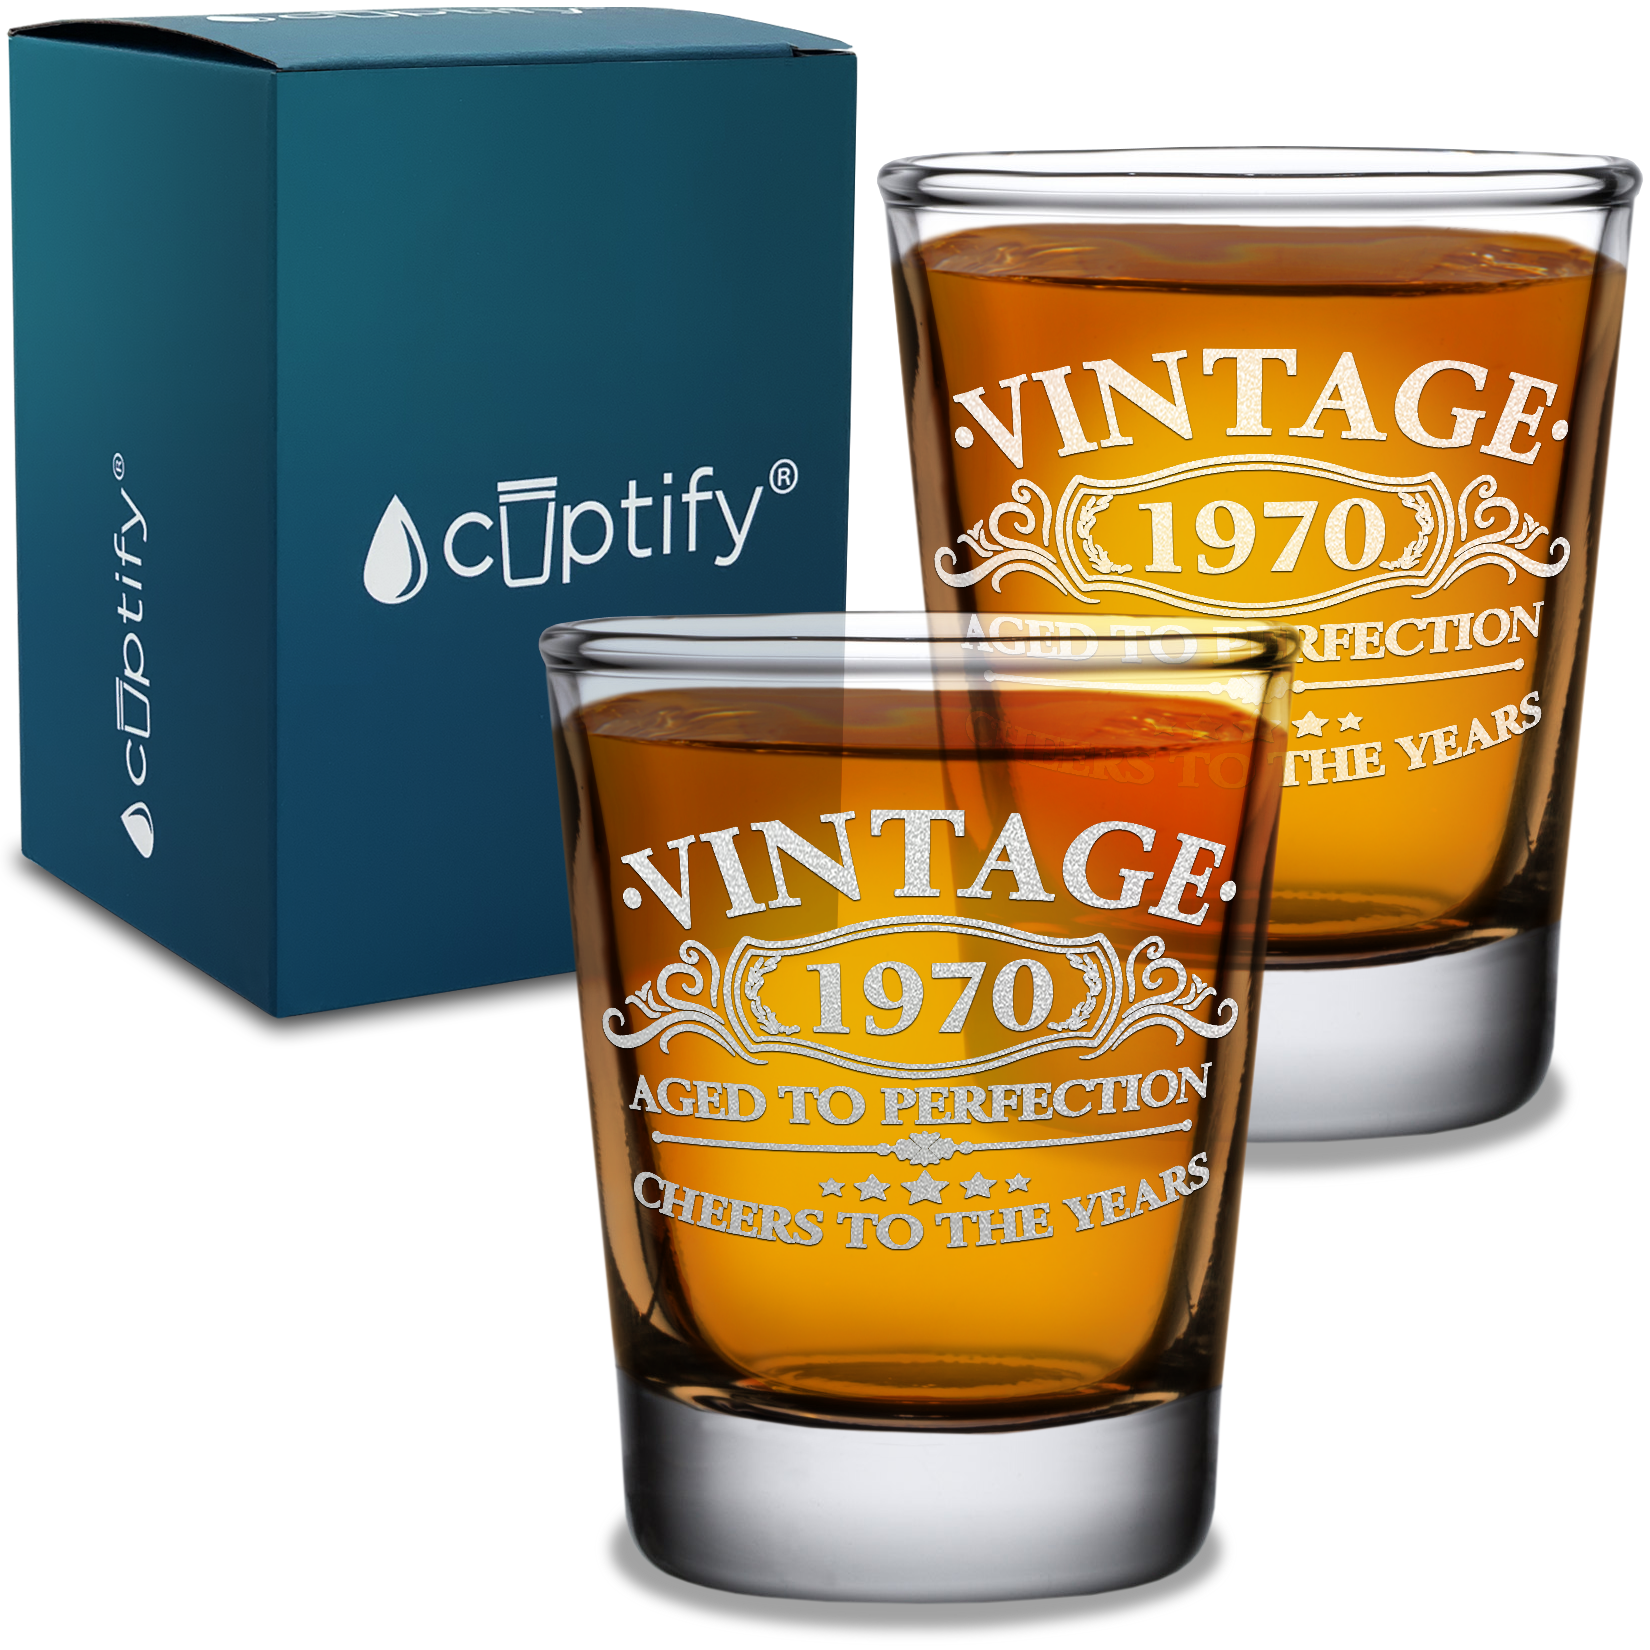 Vintage Aged To Perfection Cheers To 51 Years 1970 Laser Engraved on 2oz Shot Glasses - Set of 2